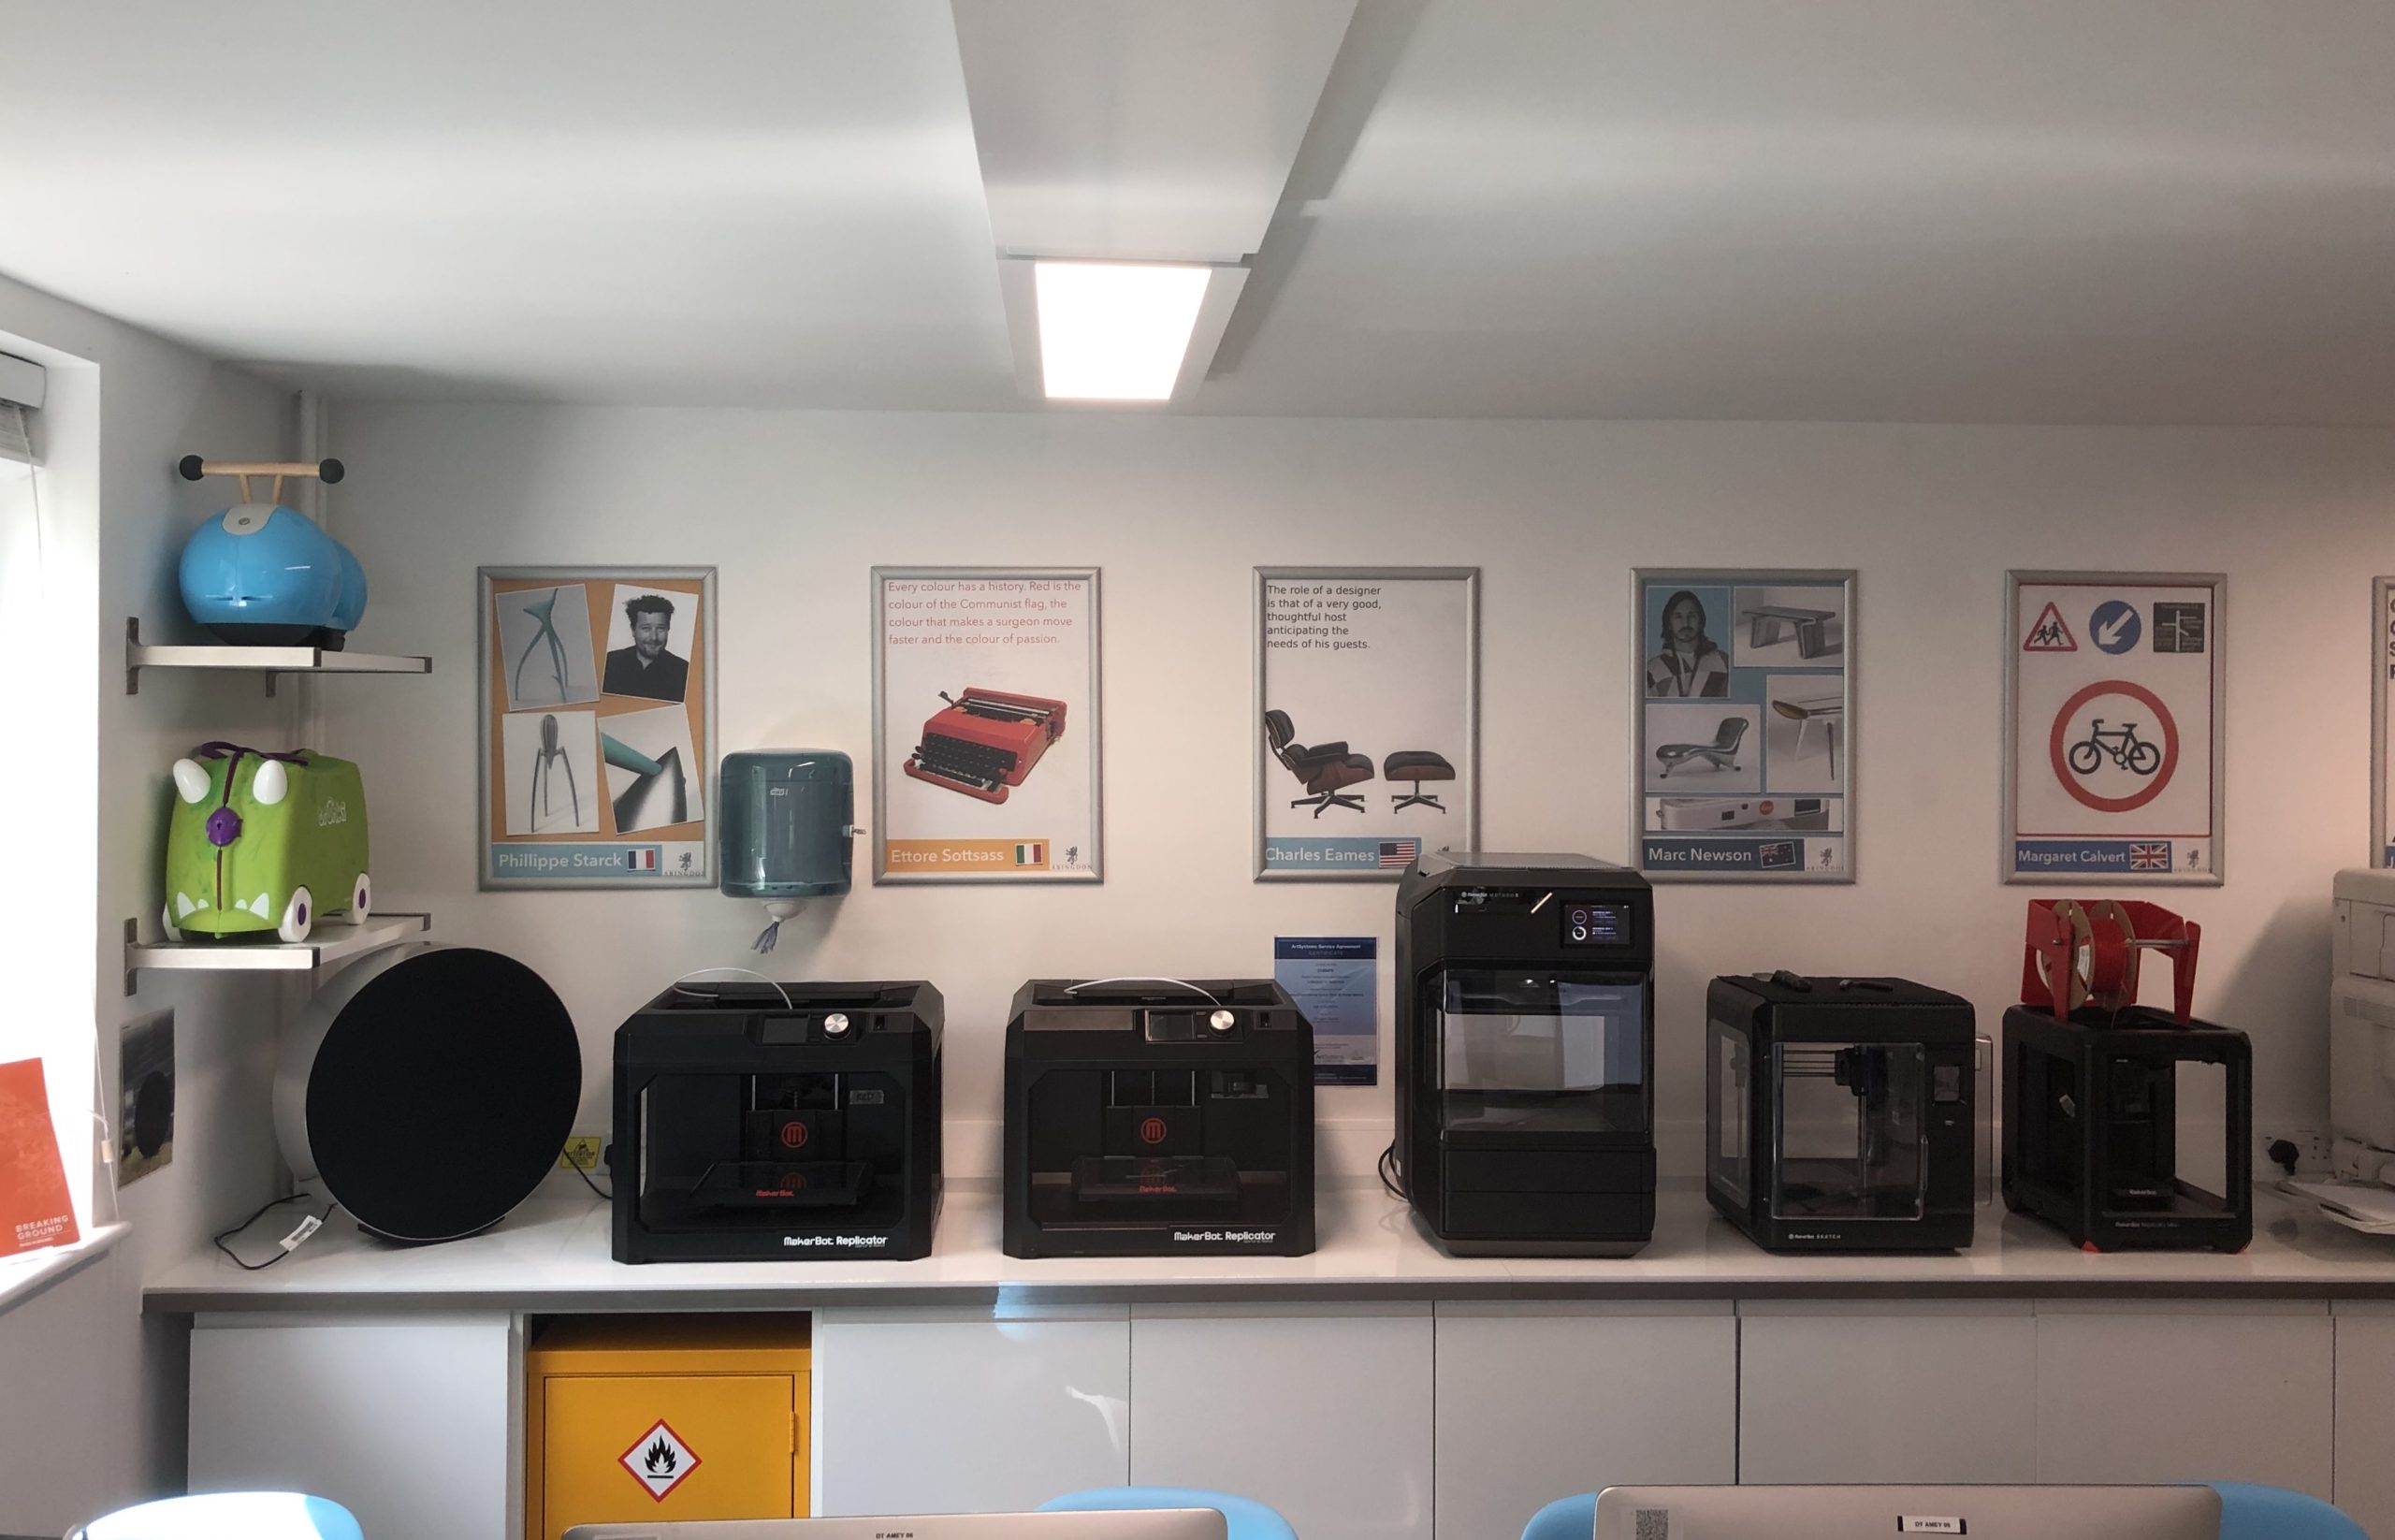 Abingdon School expands its 3D printing resources with MakerBot METHOD and SKETCH 3D printers